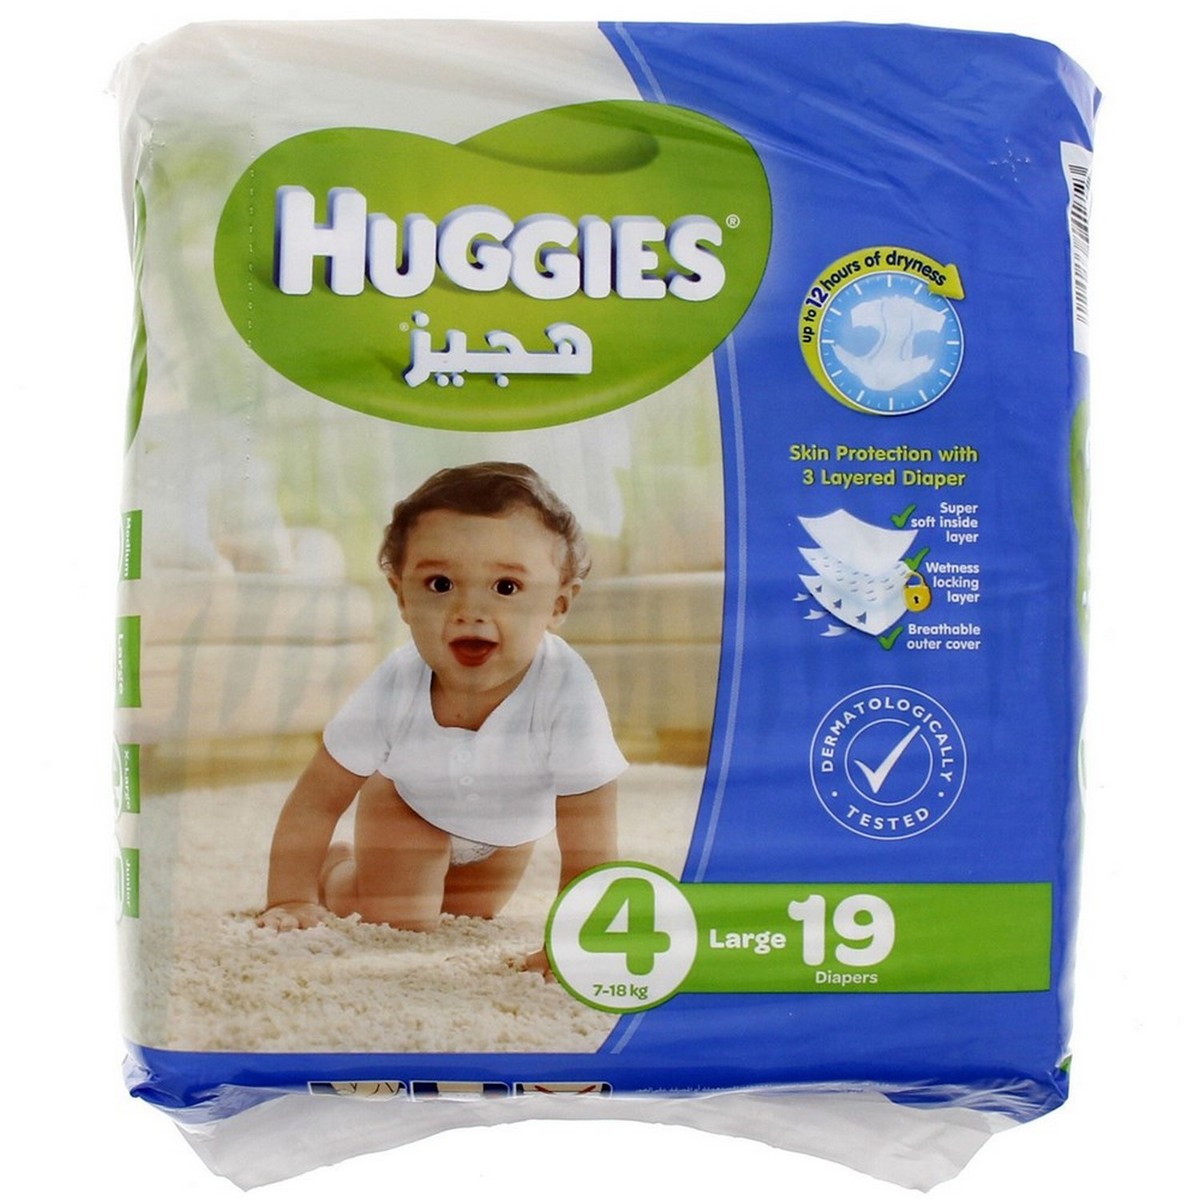 Huggies Size 4 Large 7-18 Kg 19 Diapers